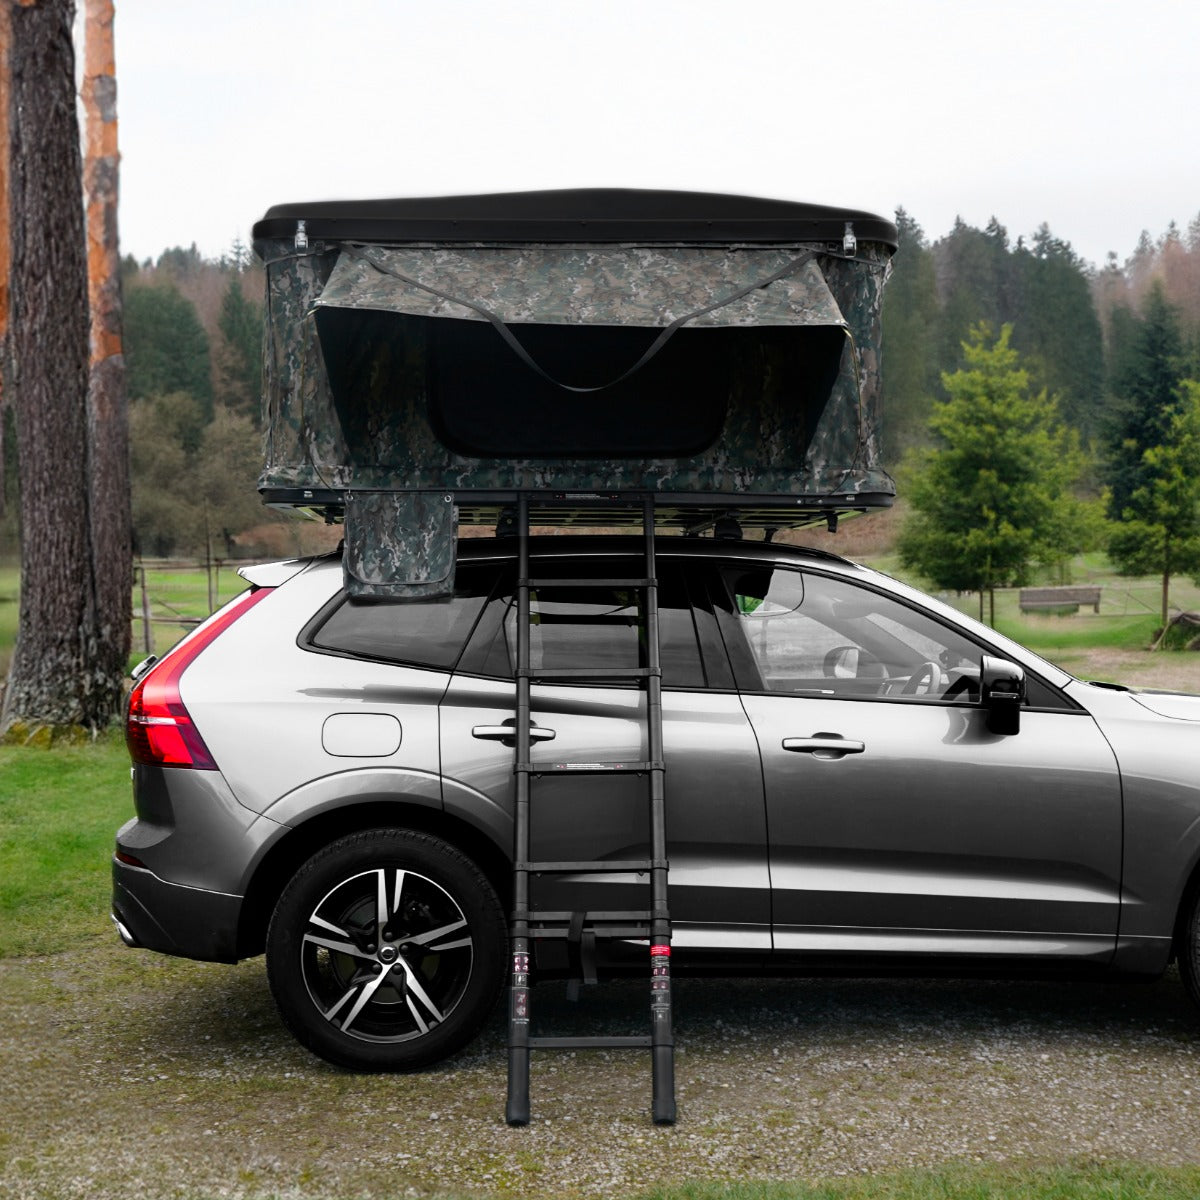 Car Roof Tent – Camouflage